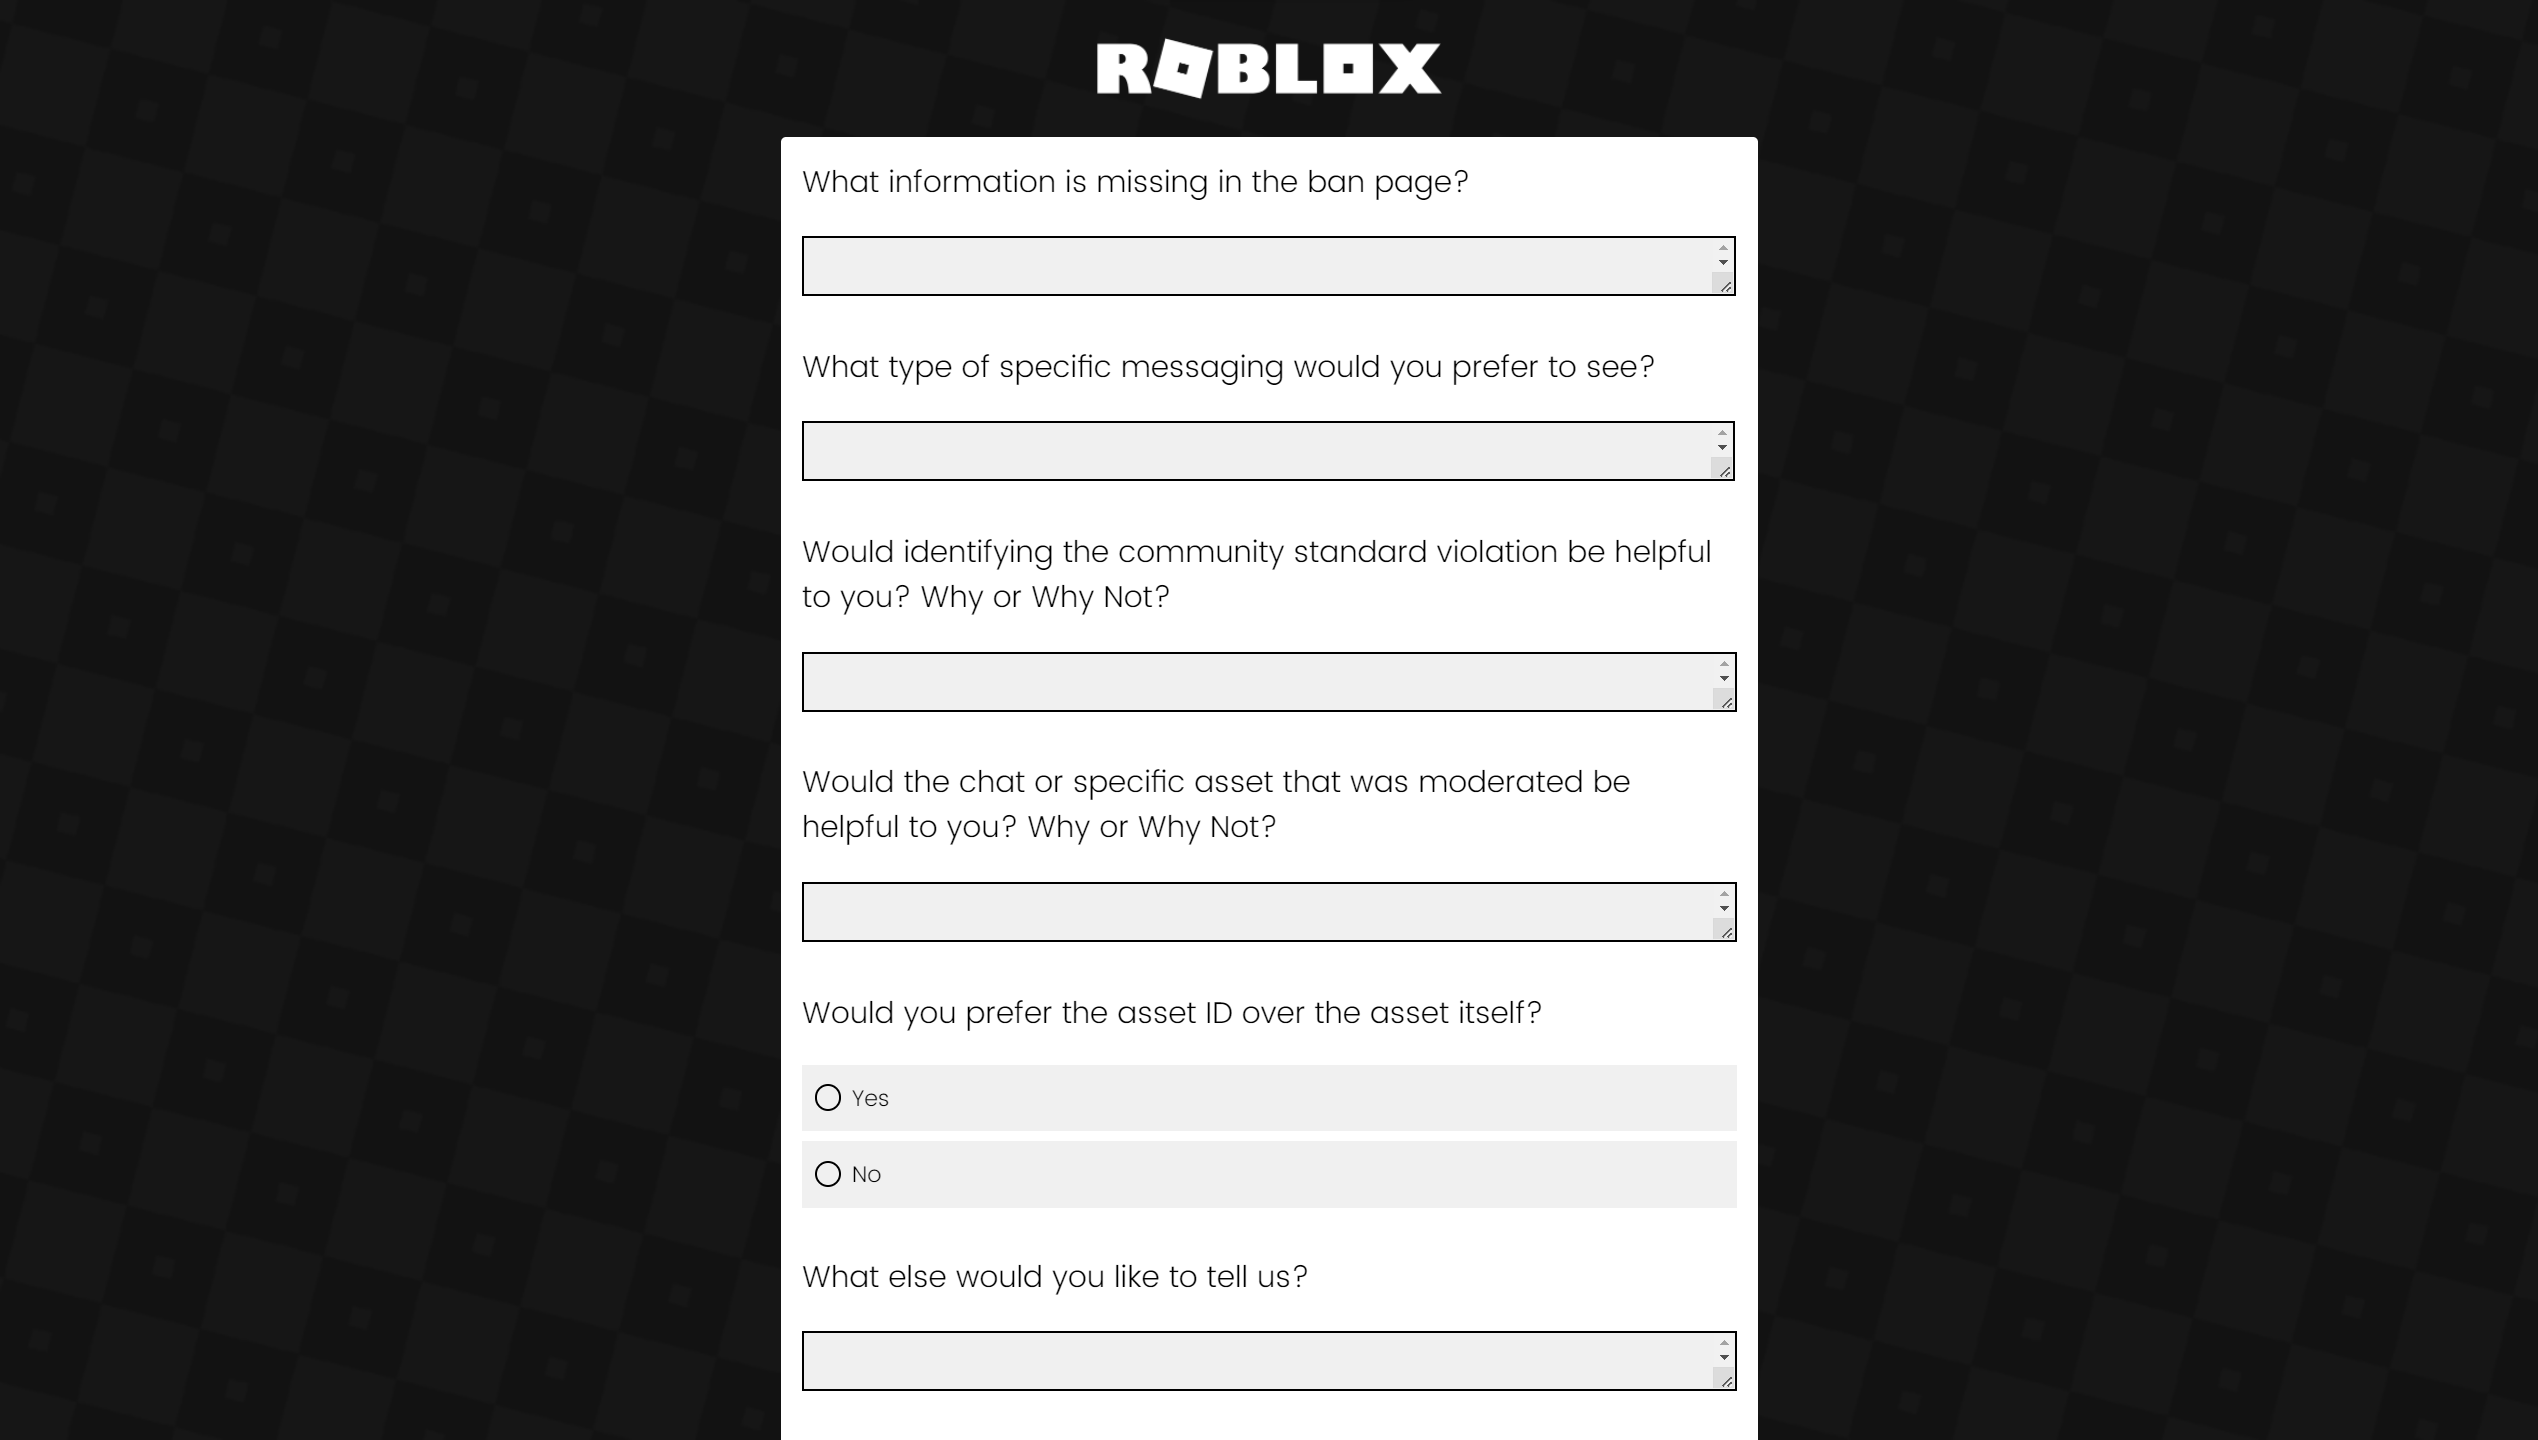 Bloxy News on X: For obvious reasons, the link to take the survey will not  be posted publicly. However, for those curious, here are the questions the  survey consists of:  /